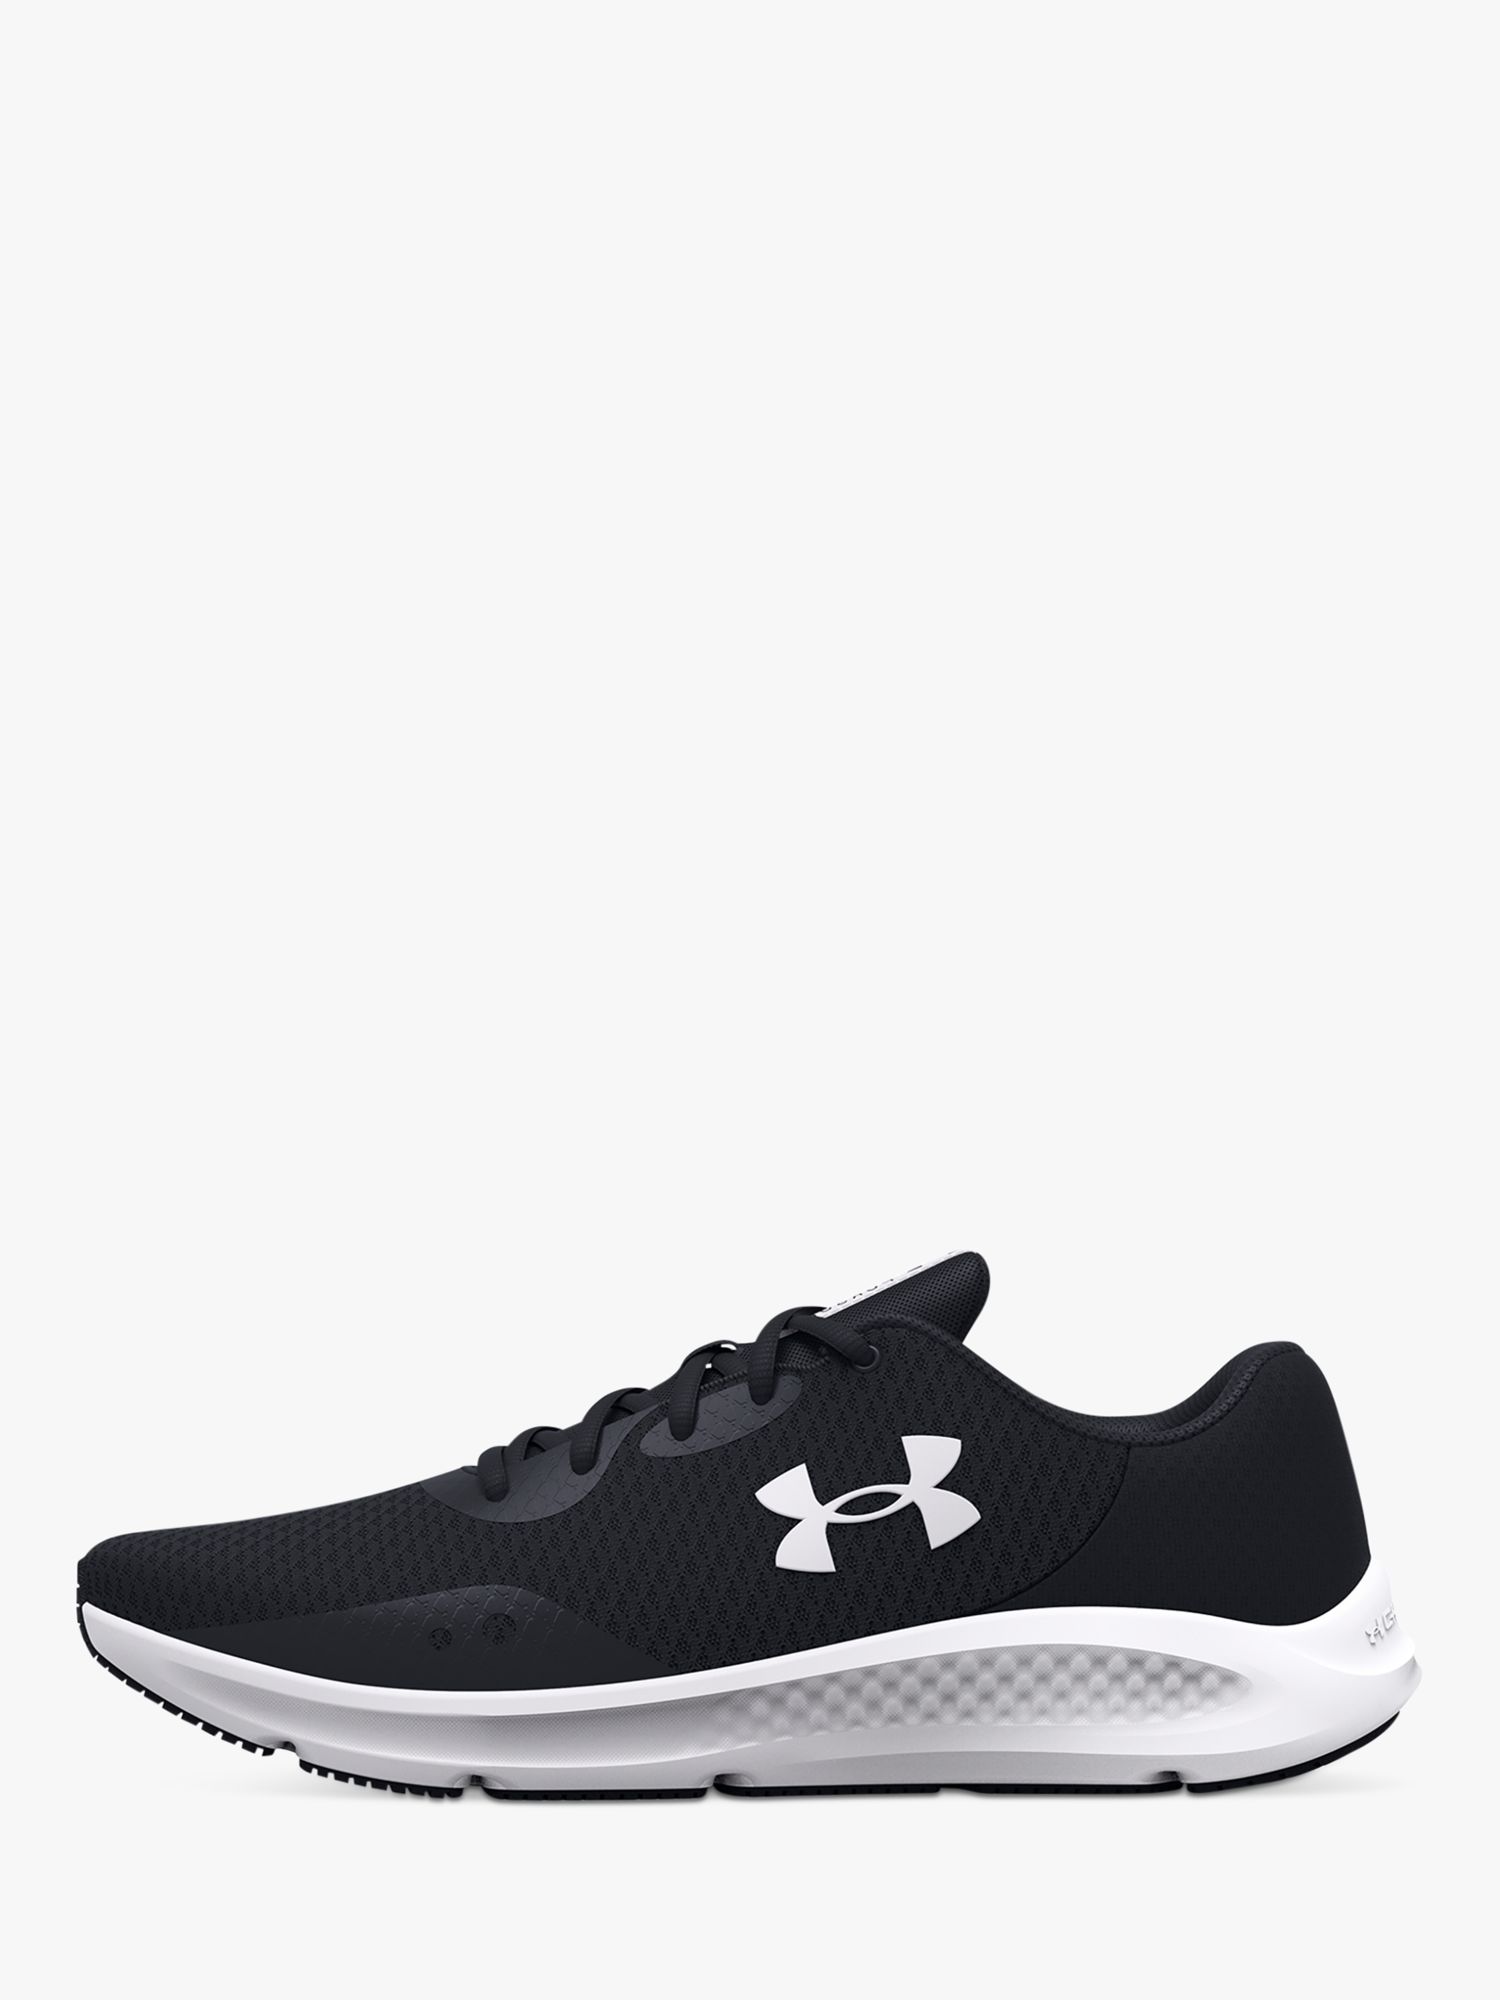 Buy Under Armour Women's Mesh Sports Trainers, Black/White Online at johnlewis.com